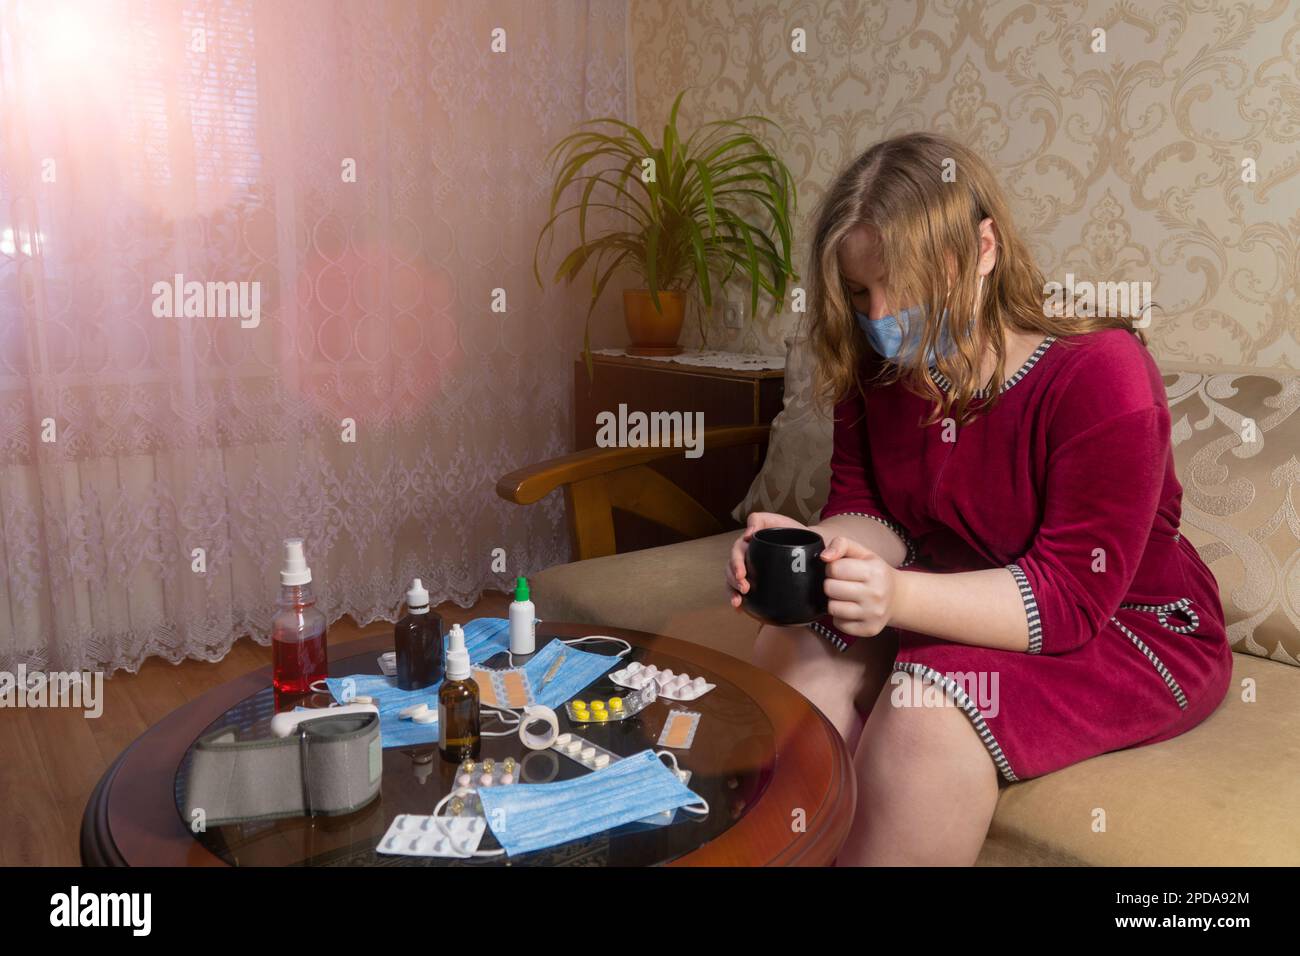 Girl with sits on a sofa in the room and holds a cup with a hot drink in her hands. Concept of medicine, pharmacy, healthcare and home treatment Stock Photo